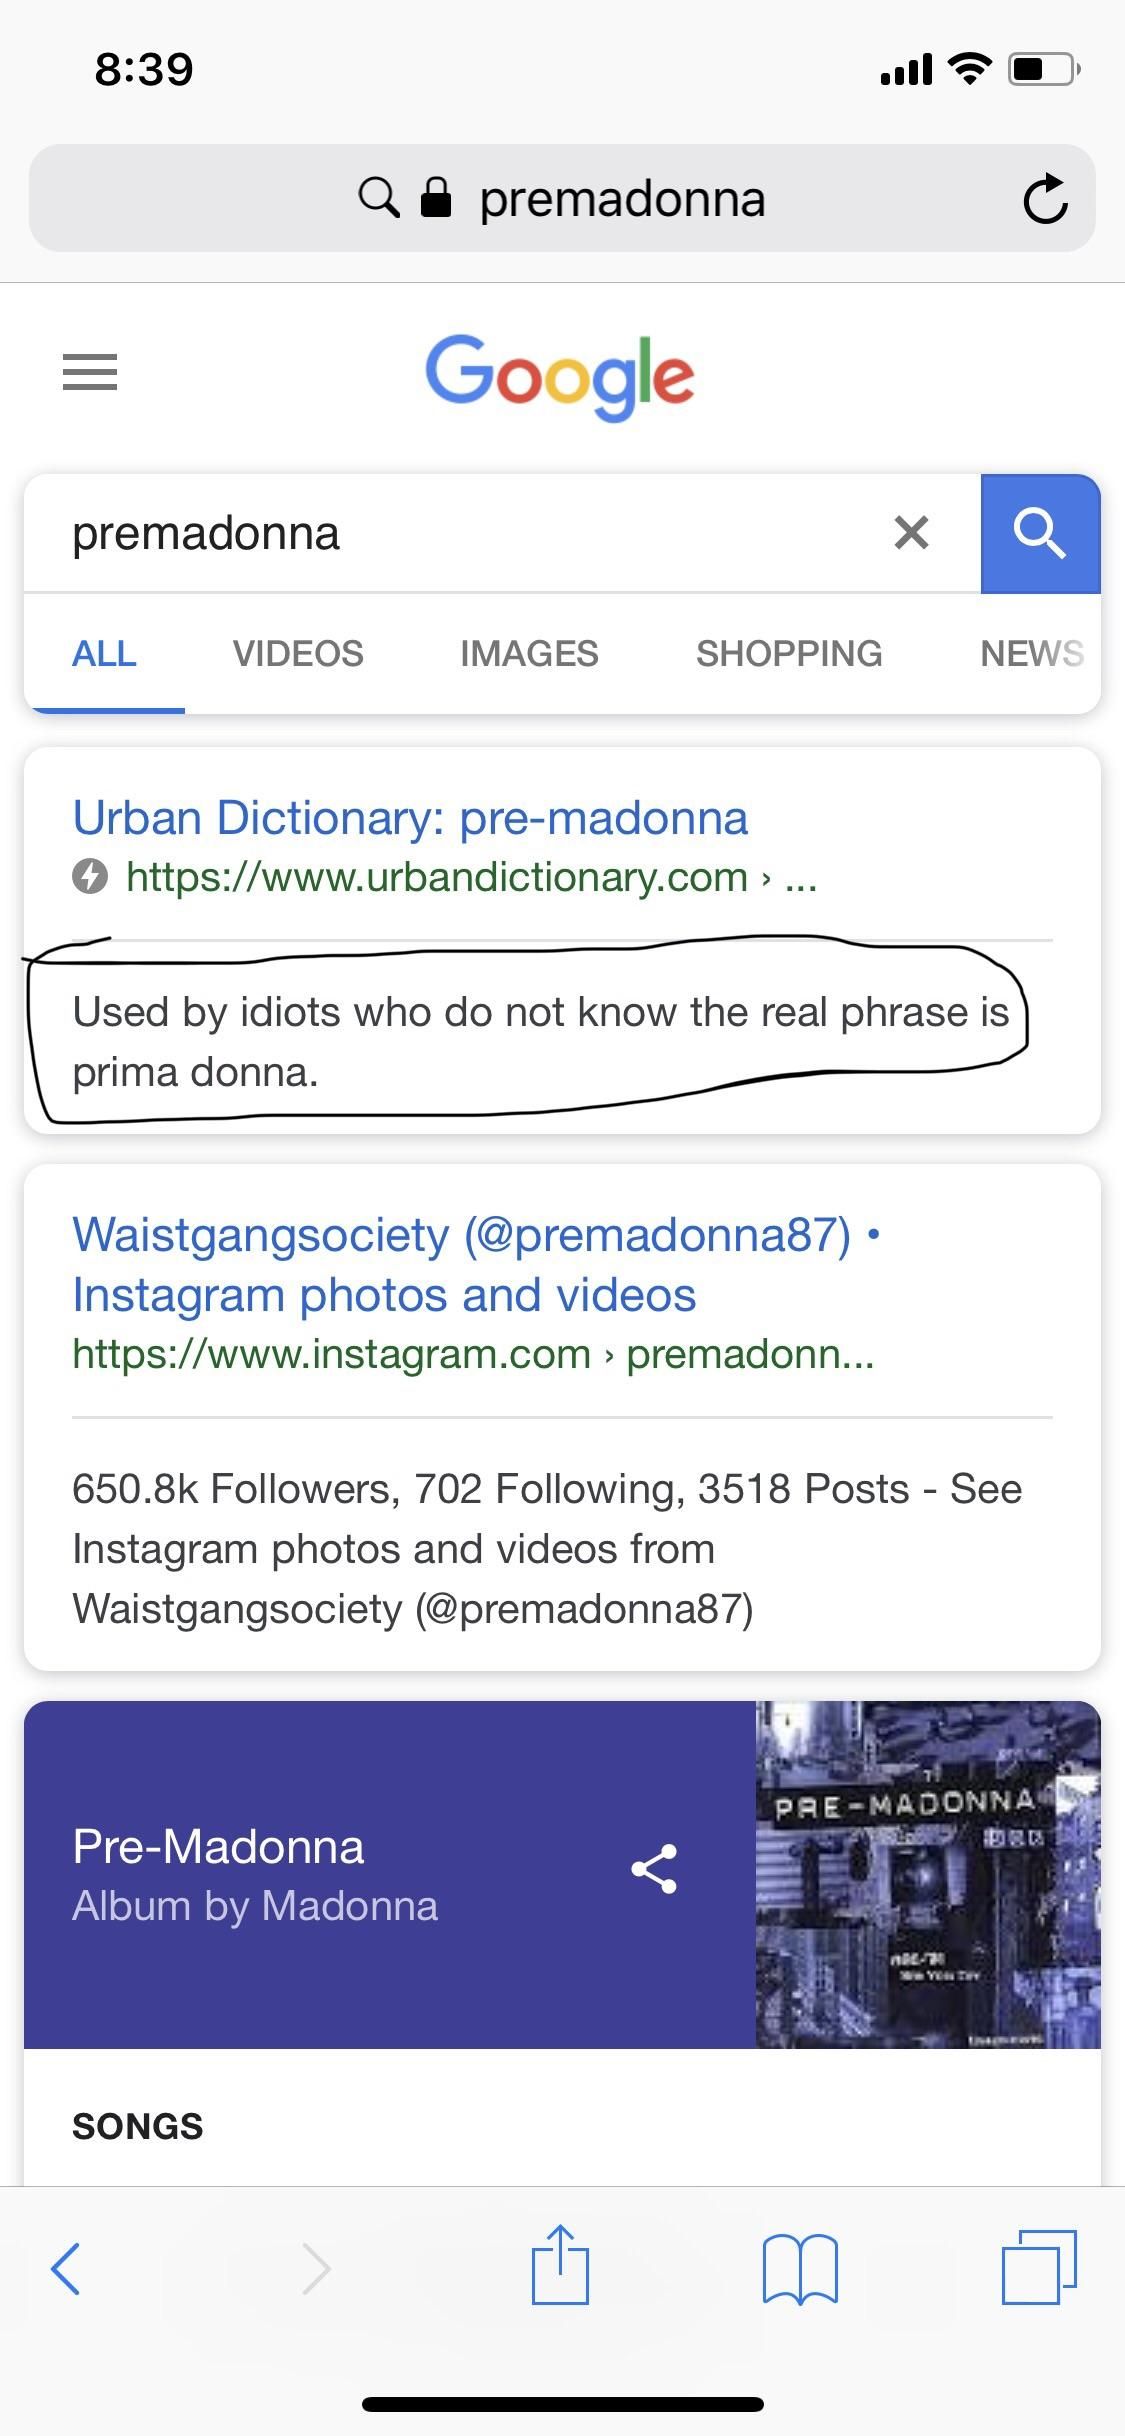 I heard the term “prima donna” in a movie. I was not familiar with the term so I Googled “premadonna”. I feel stupid...